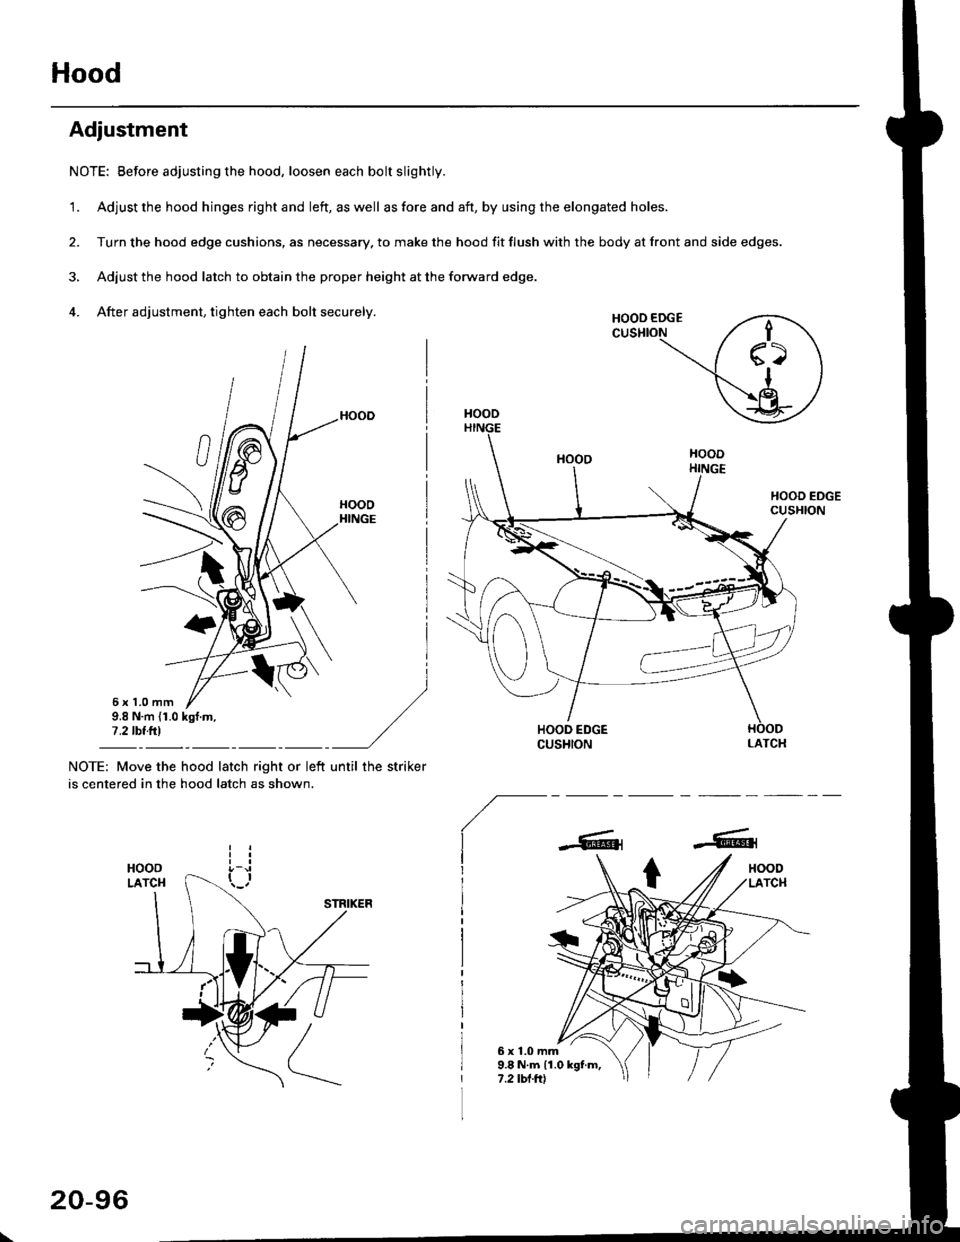 HONDA CIVIC 1997 6.G Workshop Manual Hood
Adjustment
NOTE: Before adjusting the hood, loosen each bolt slightly.
1. Adjust the hood hinges right and left, as well as fore and aft, by using the elongated holes.
2. Turn the hood edge cushi